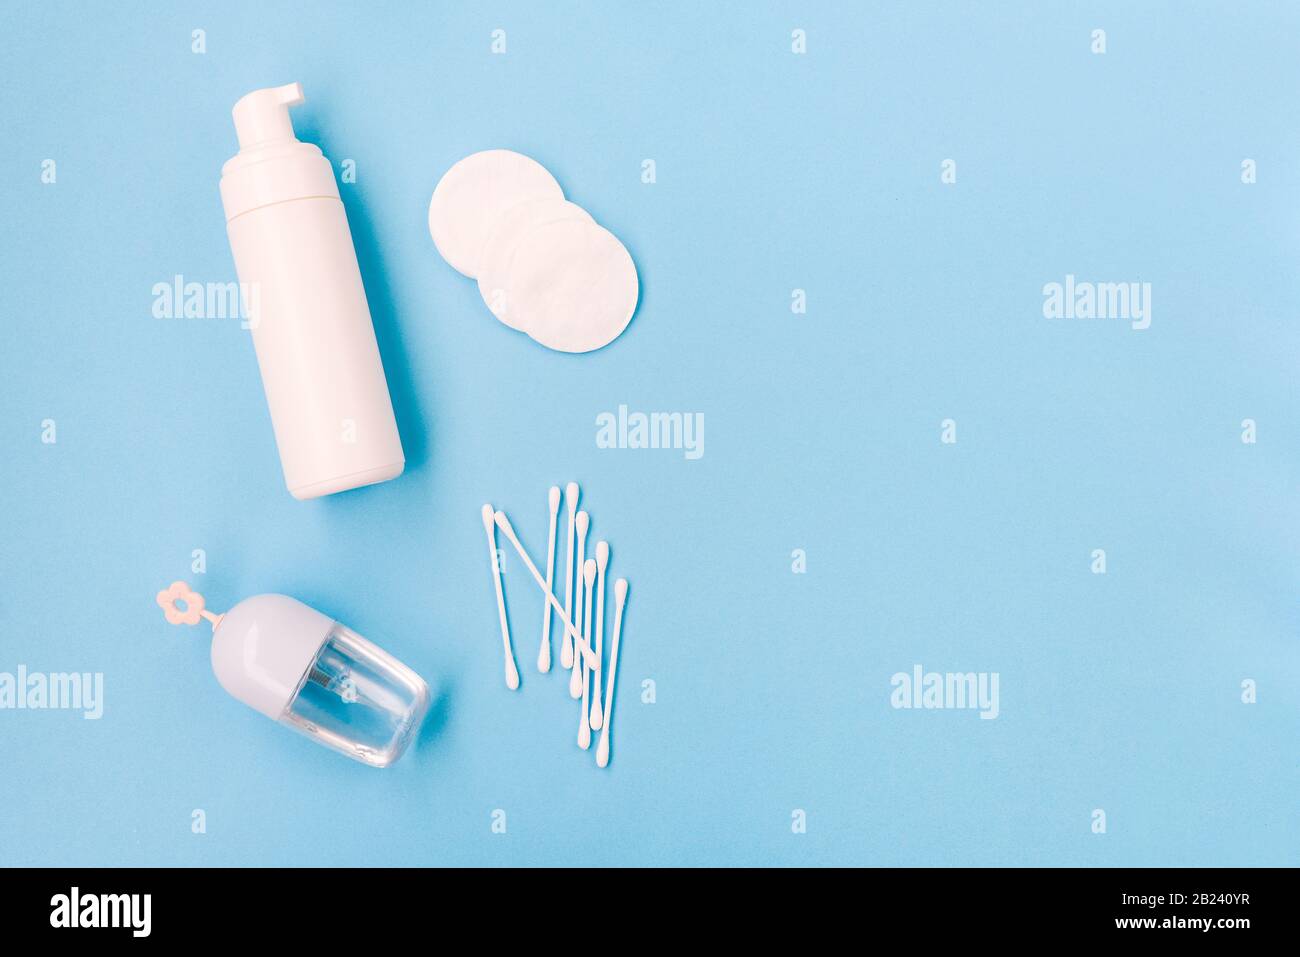 Face care. Feminine hygiene products, washing foam, micellar water, cotton pads and ear sticks Stock Photo